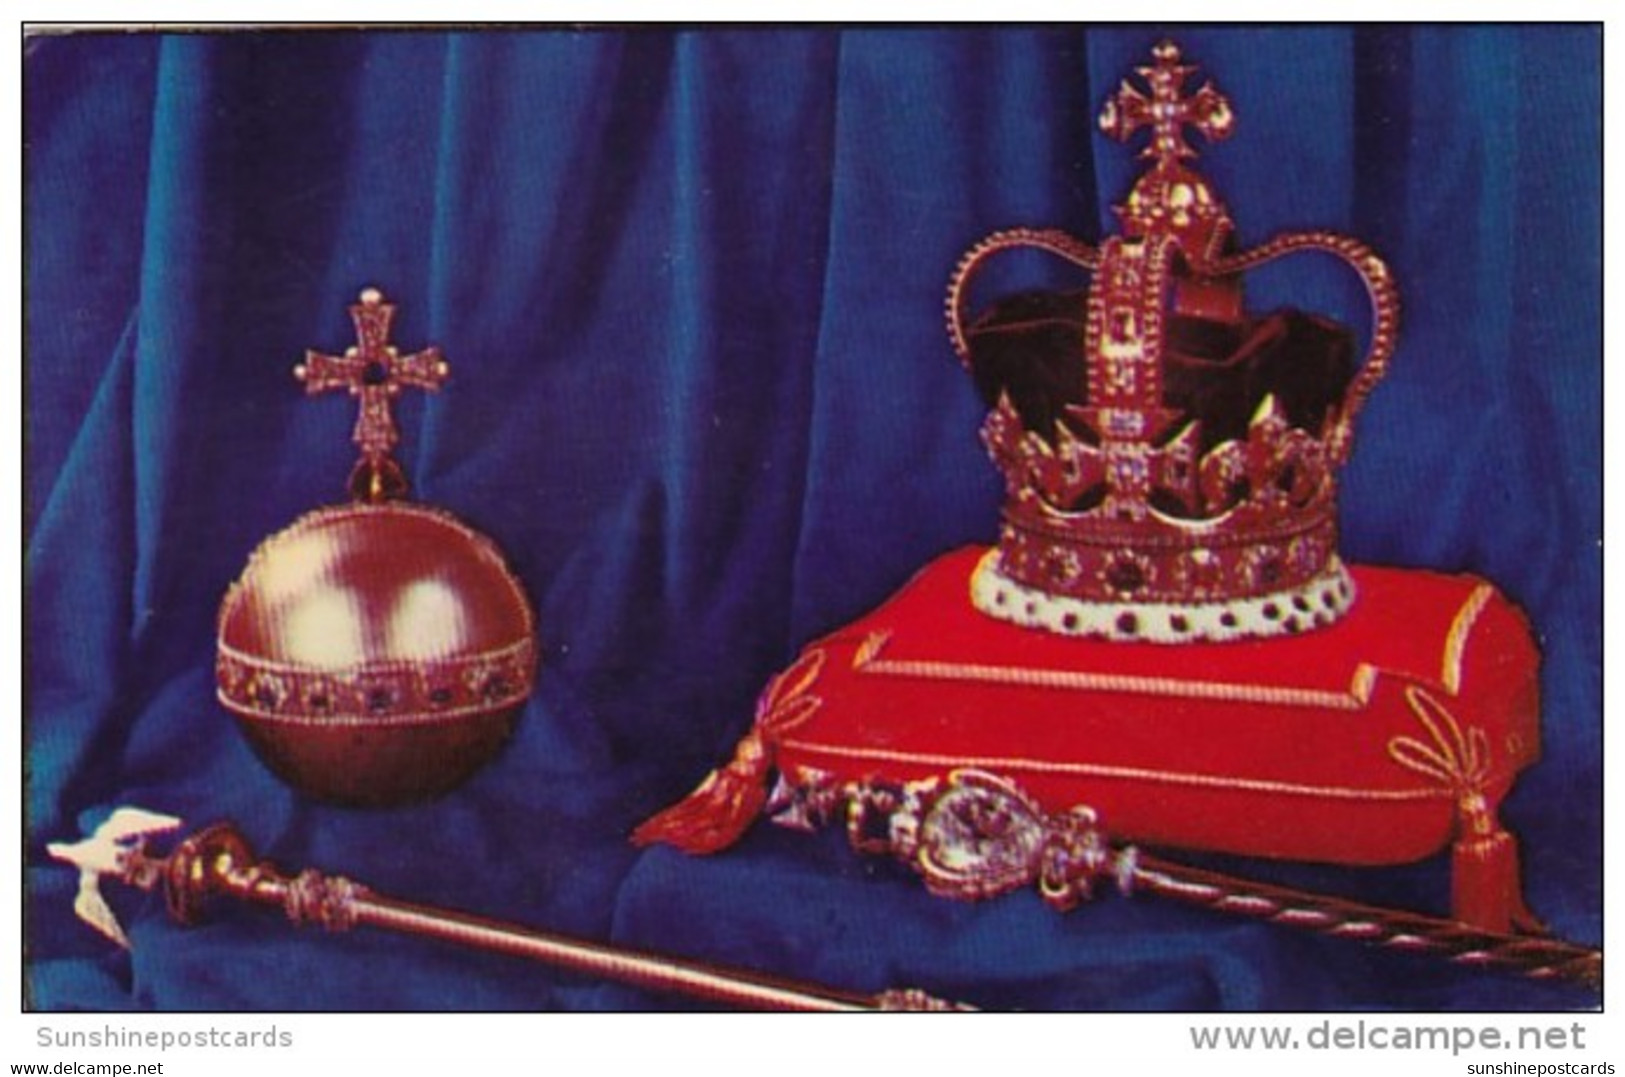 Coronation Regalia Crown Of England The Orb Royal Septre With Cross &amp; Rotal Septre With Dove 1953 - Inaugurations